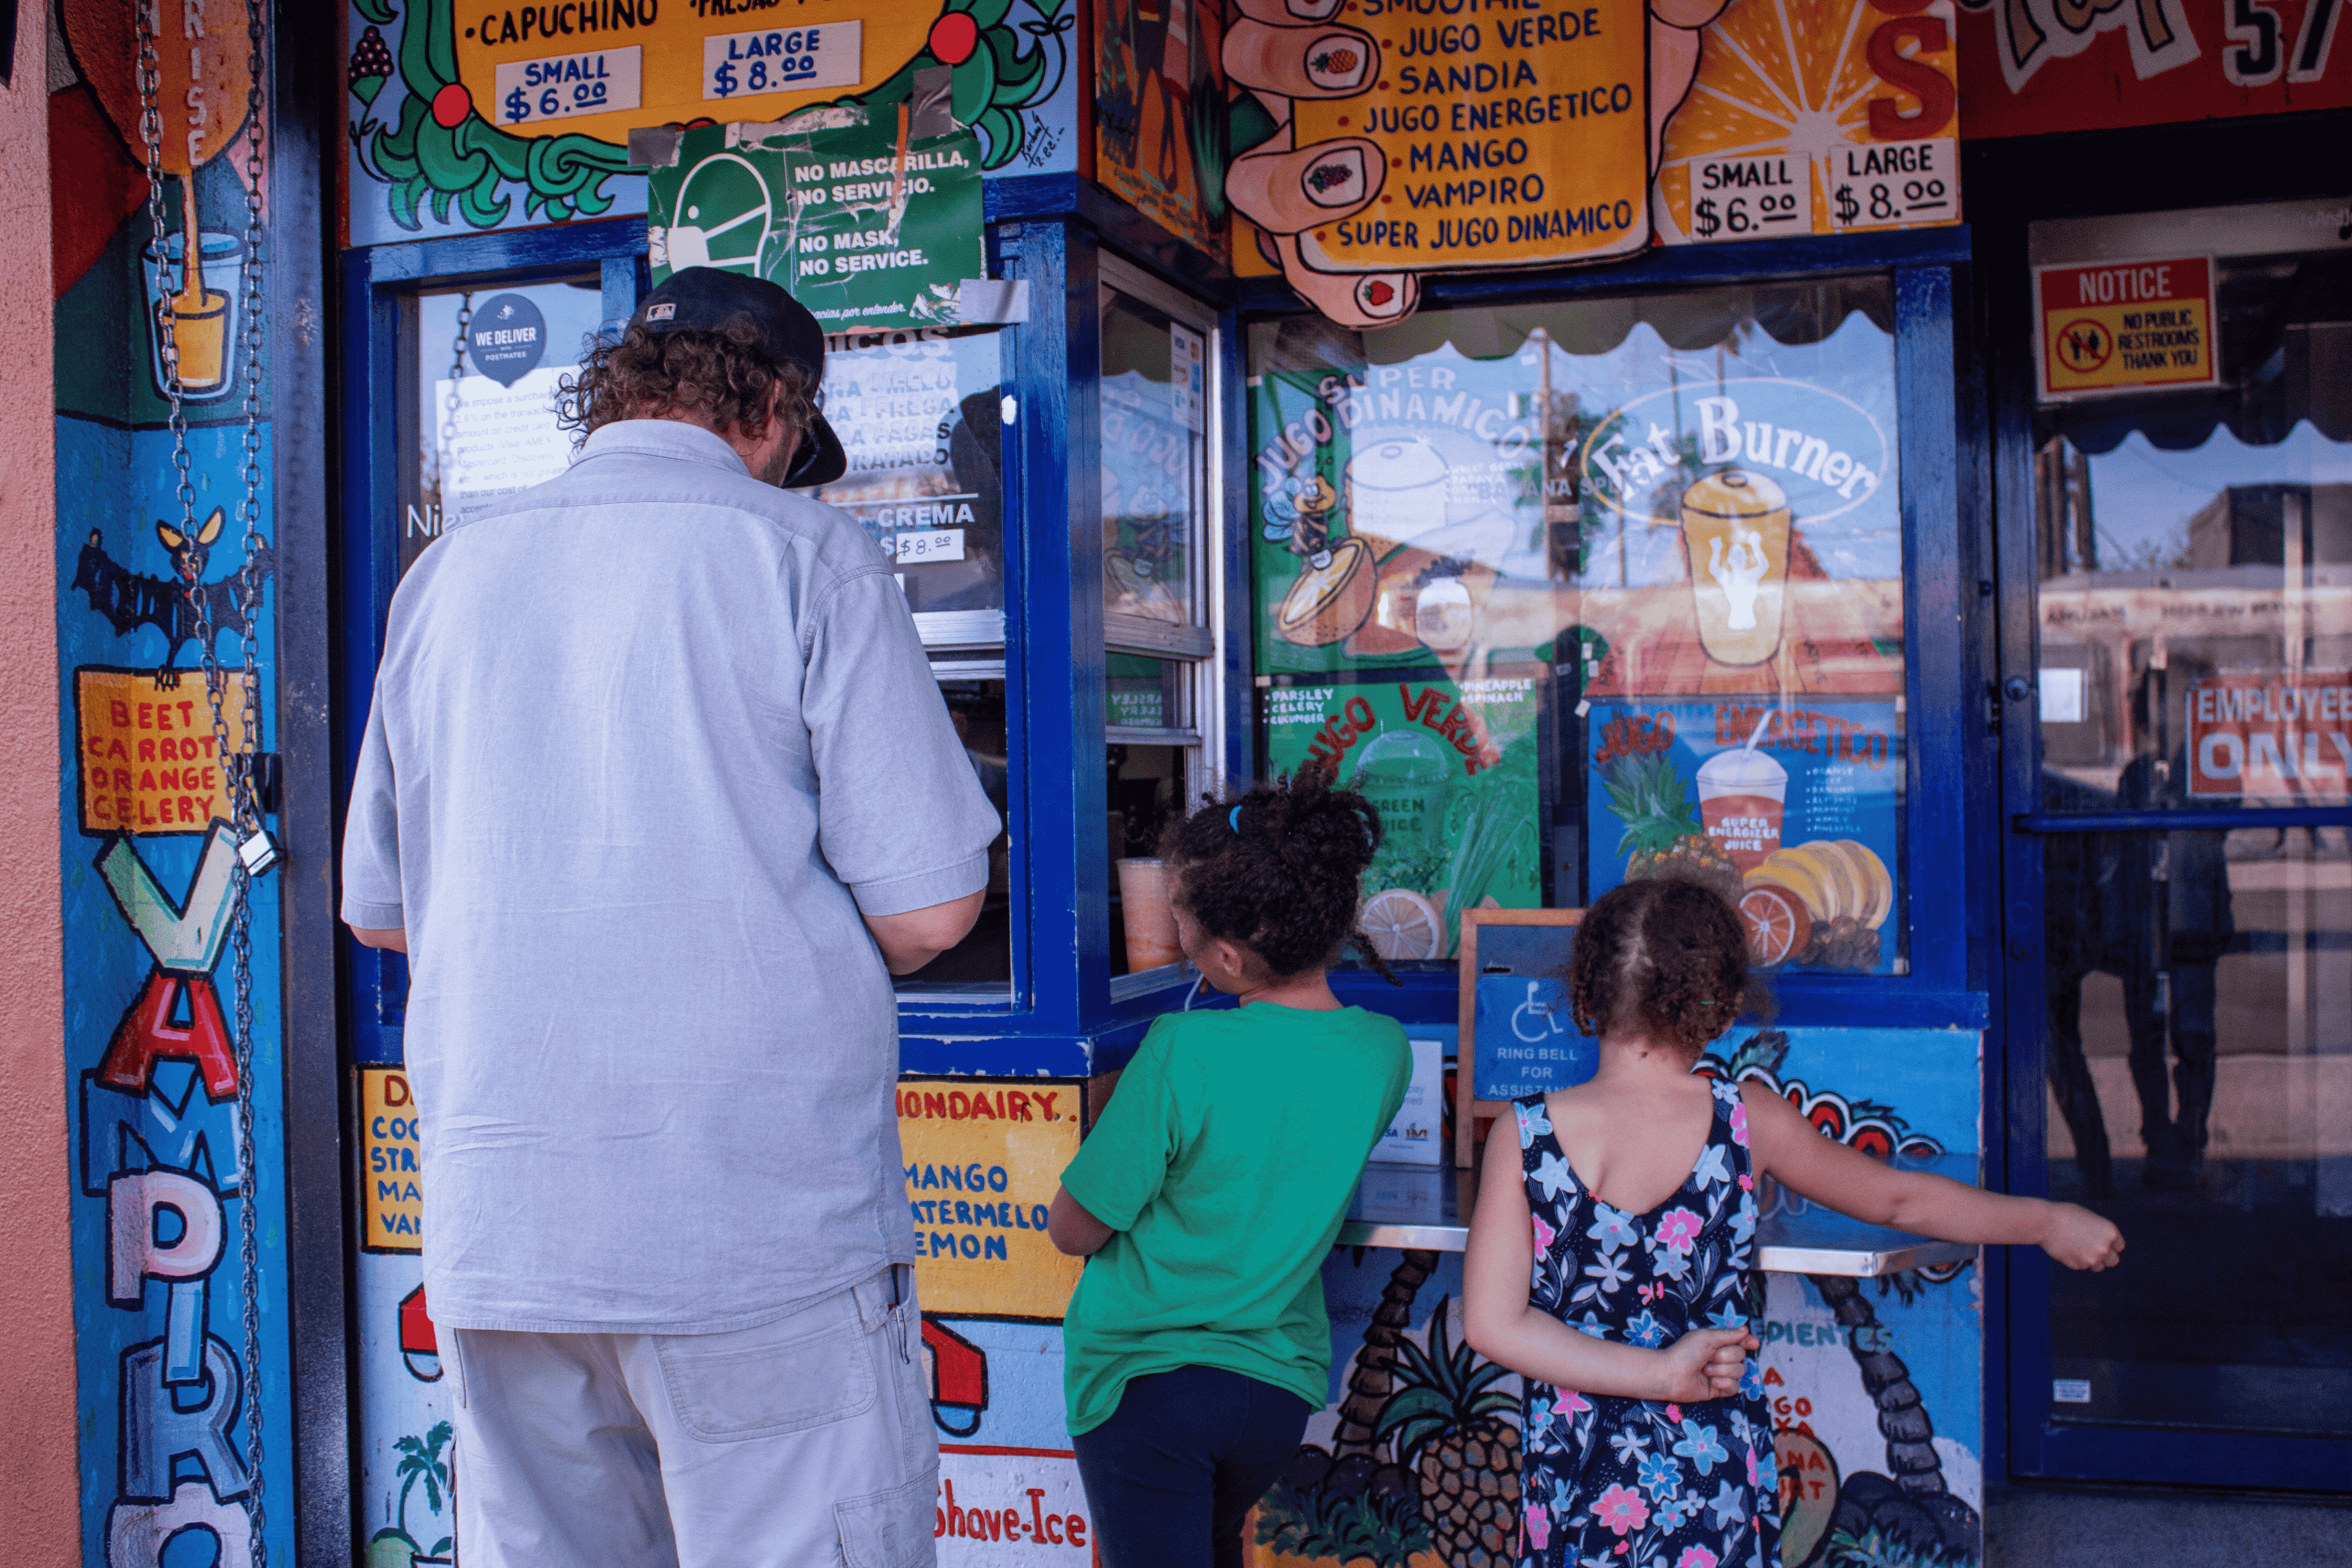 A father pays for his two young daughters, excited behind him, at a juice and smoothie stand that's bright and colorful [mostly blues and oranges].